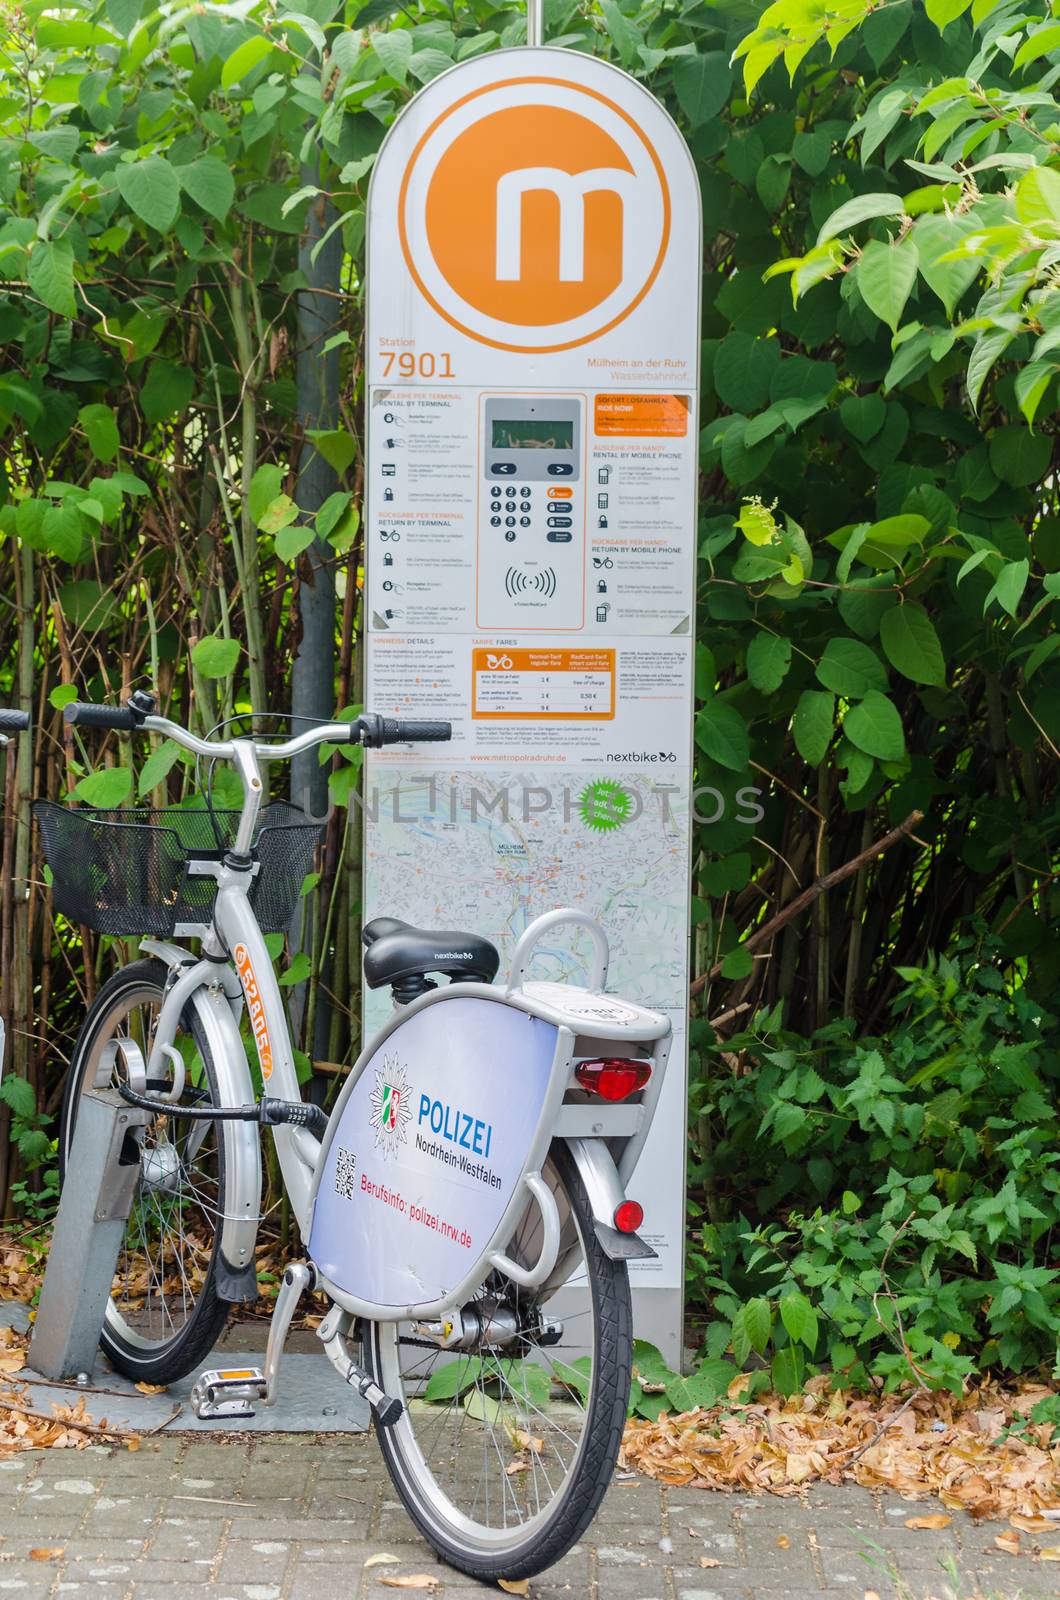 Bicycle Rental Station by JFsPic